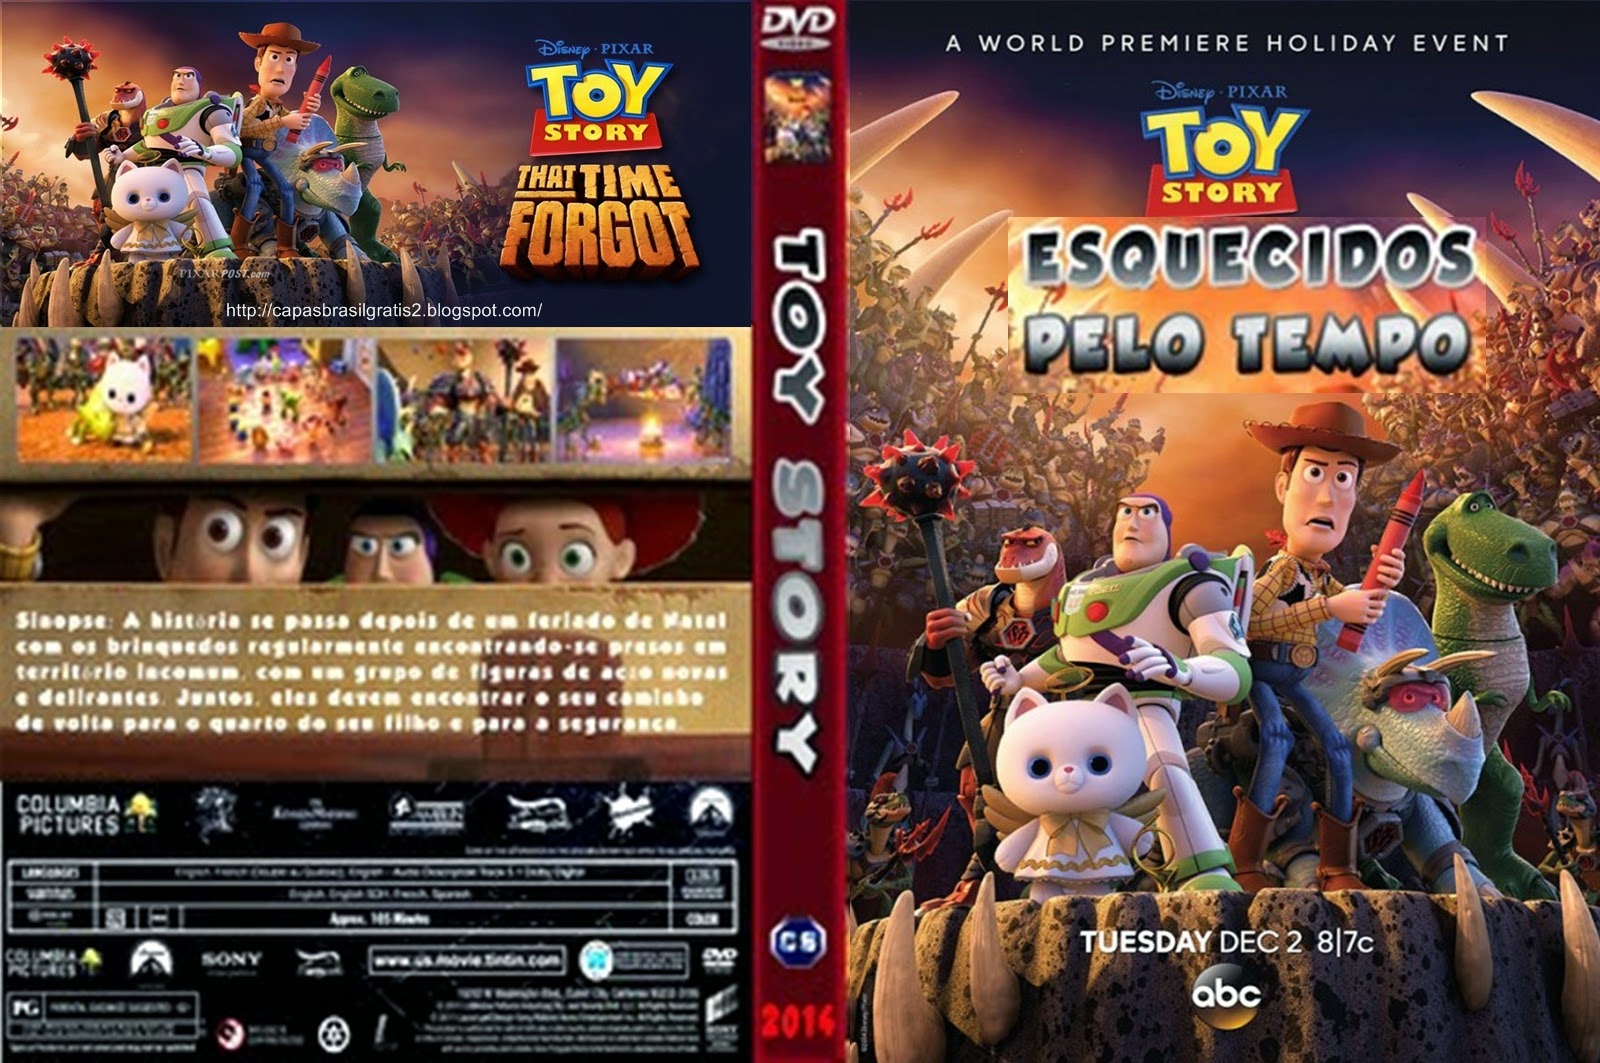 TOY STORY -  Prehystoricke pribehy /Toy story - That time